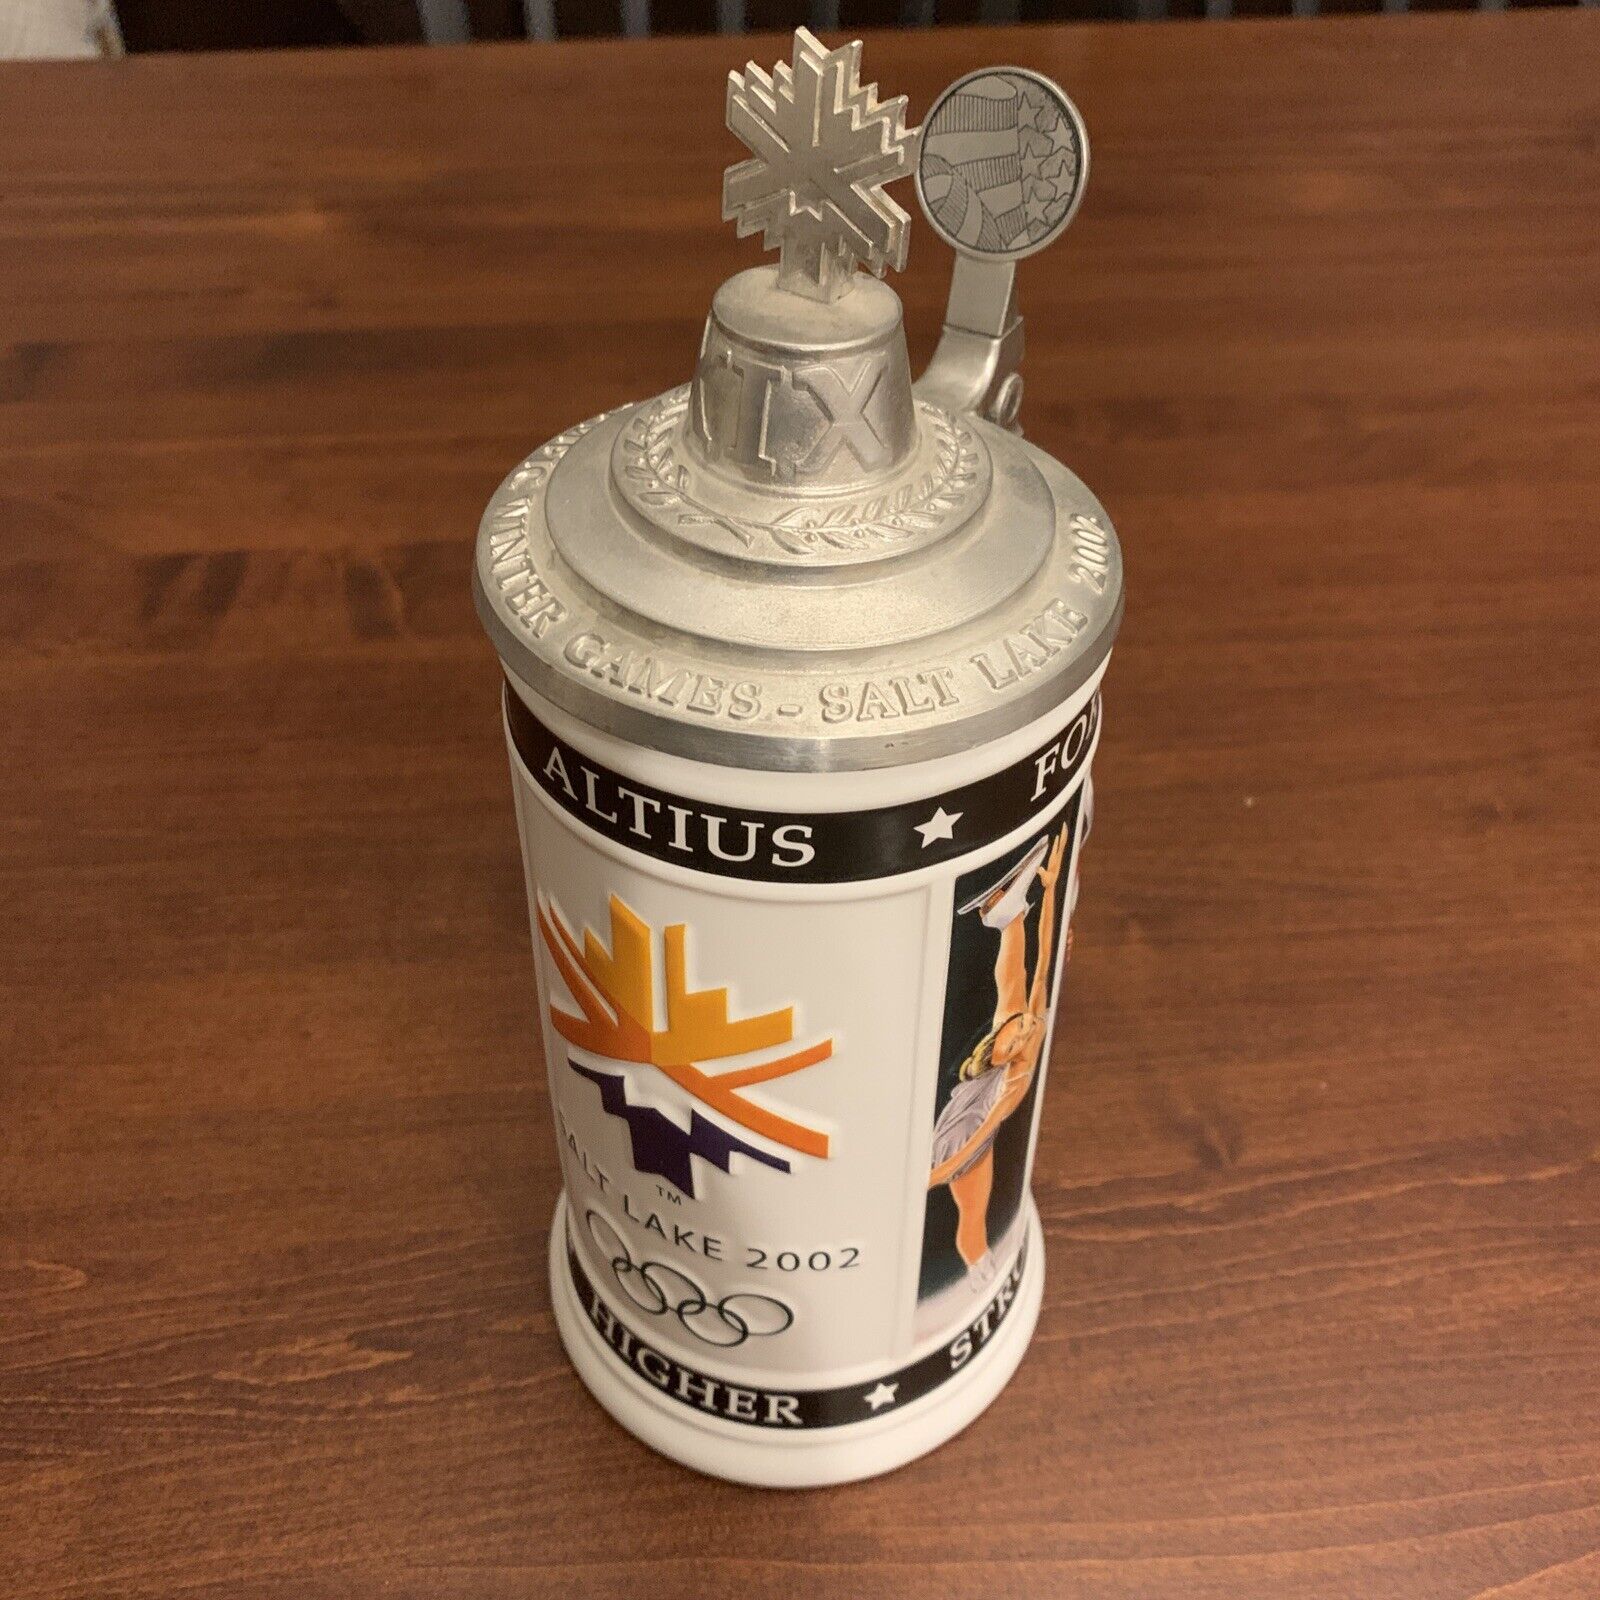 Beer Stein CELEBRATING THE CHALLENGE 2002 Olympic Winter Games  - Anheuser Busch